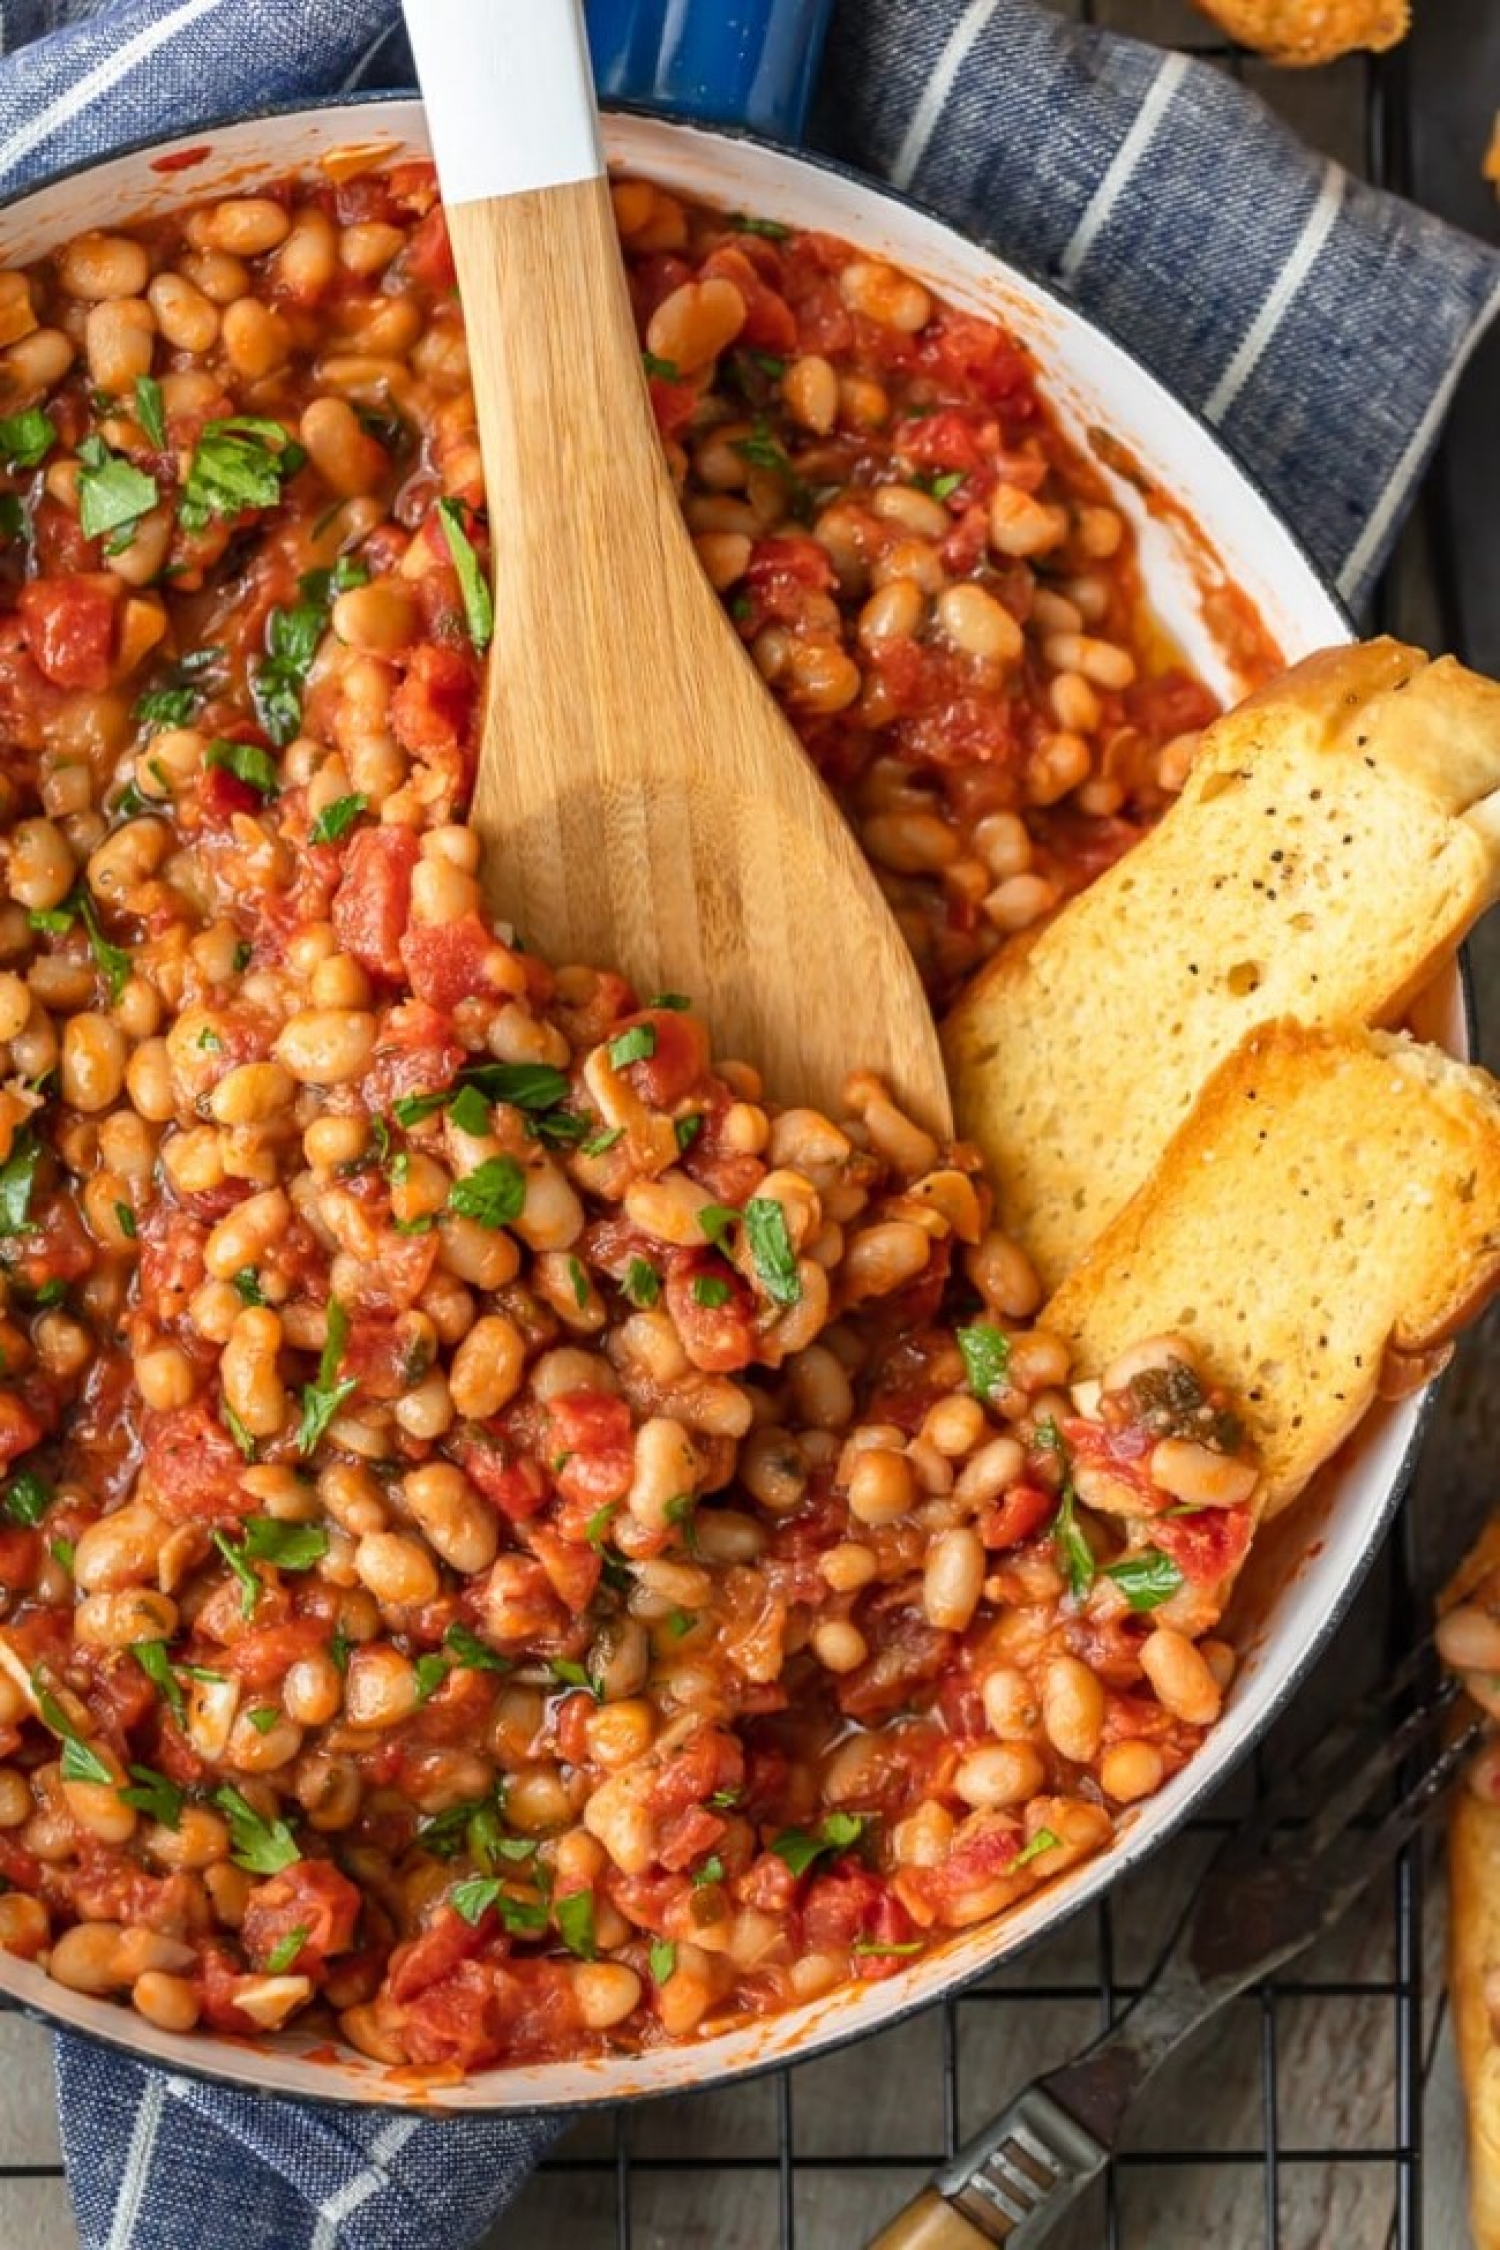 <p>In <a href="https://www.thecookierookie.com/white-beans-recipe/" rel="noopener">this easy recipe</a>, white beans meld seamlessly in a garlicky tomato sauce with fresh sage and parsley. Ready in just 20 minutes, it's perfect as a side dish or even served on toast as a light main.</p>